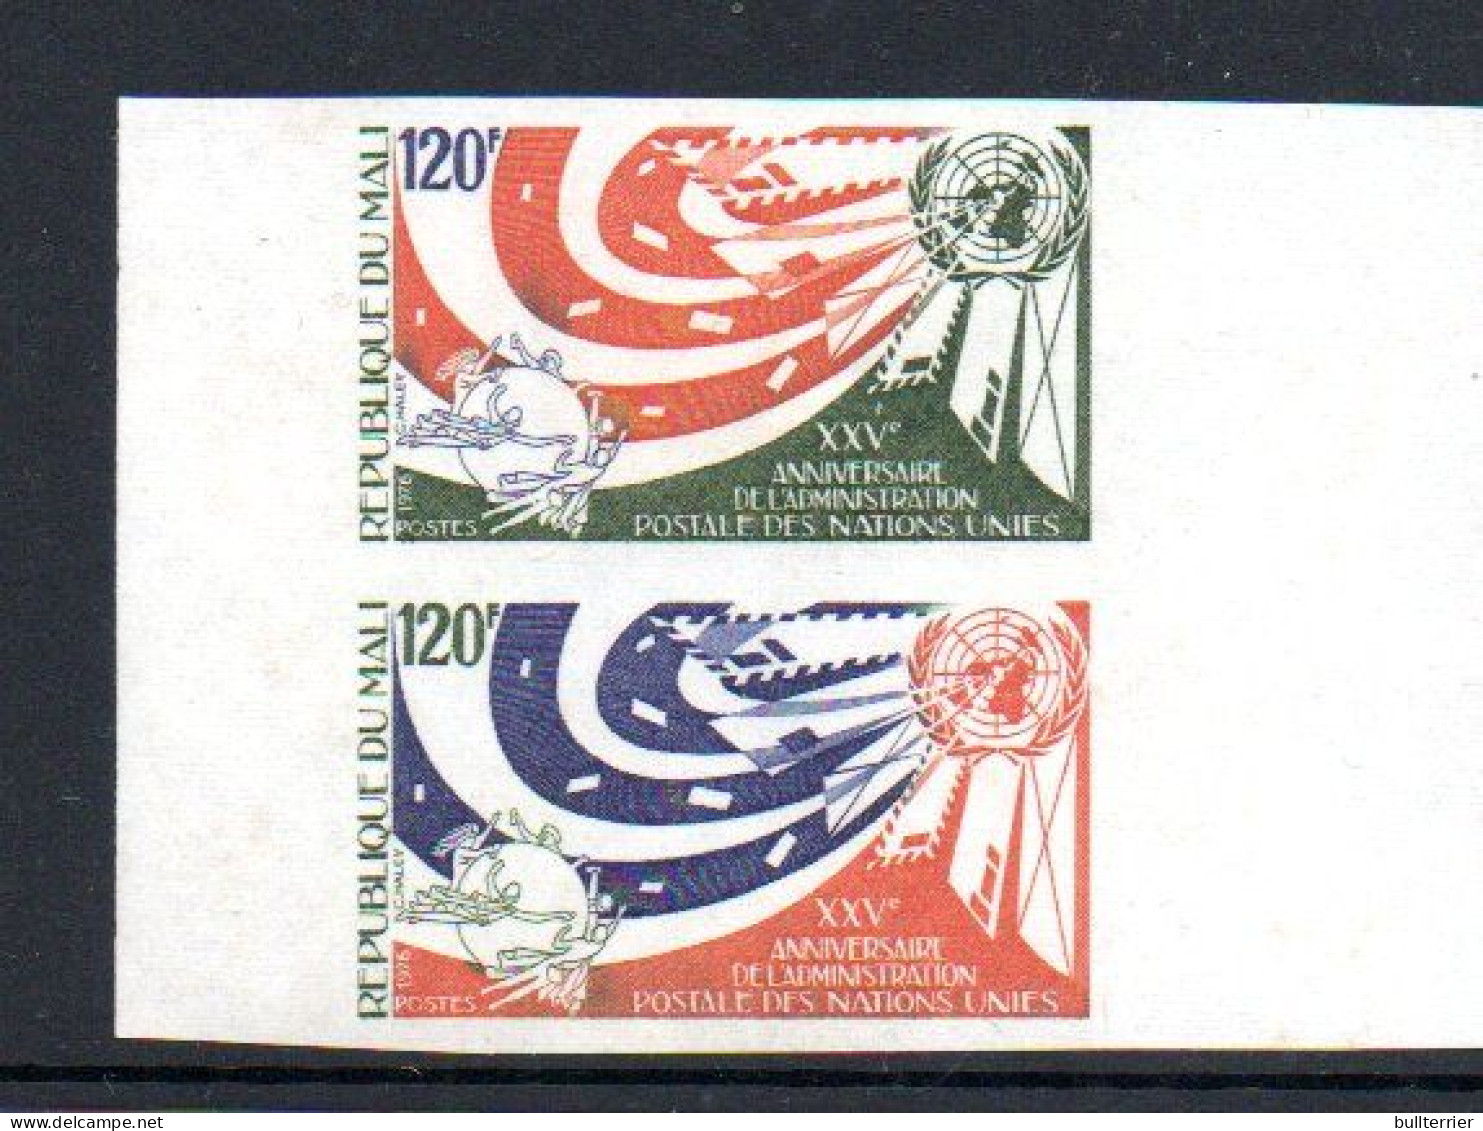 MALI - 1976 - UNITED NATIONS 120FR IMPERF PROOF PAIR DIFFERENT COLOURS  MINT NEVER HINGED, - Mali (1959-...)